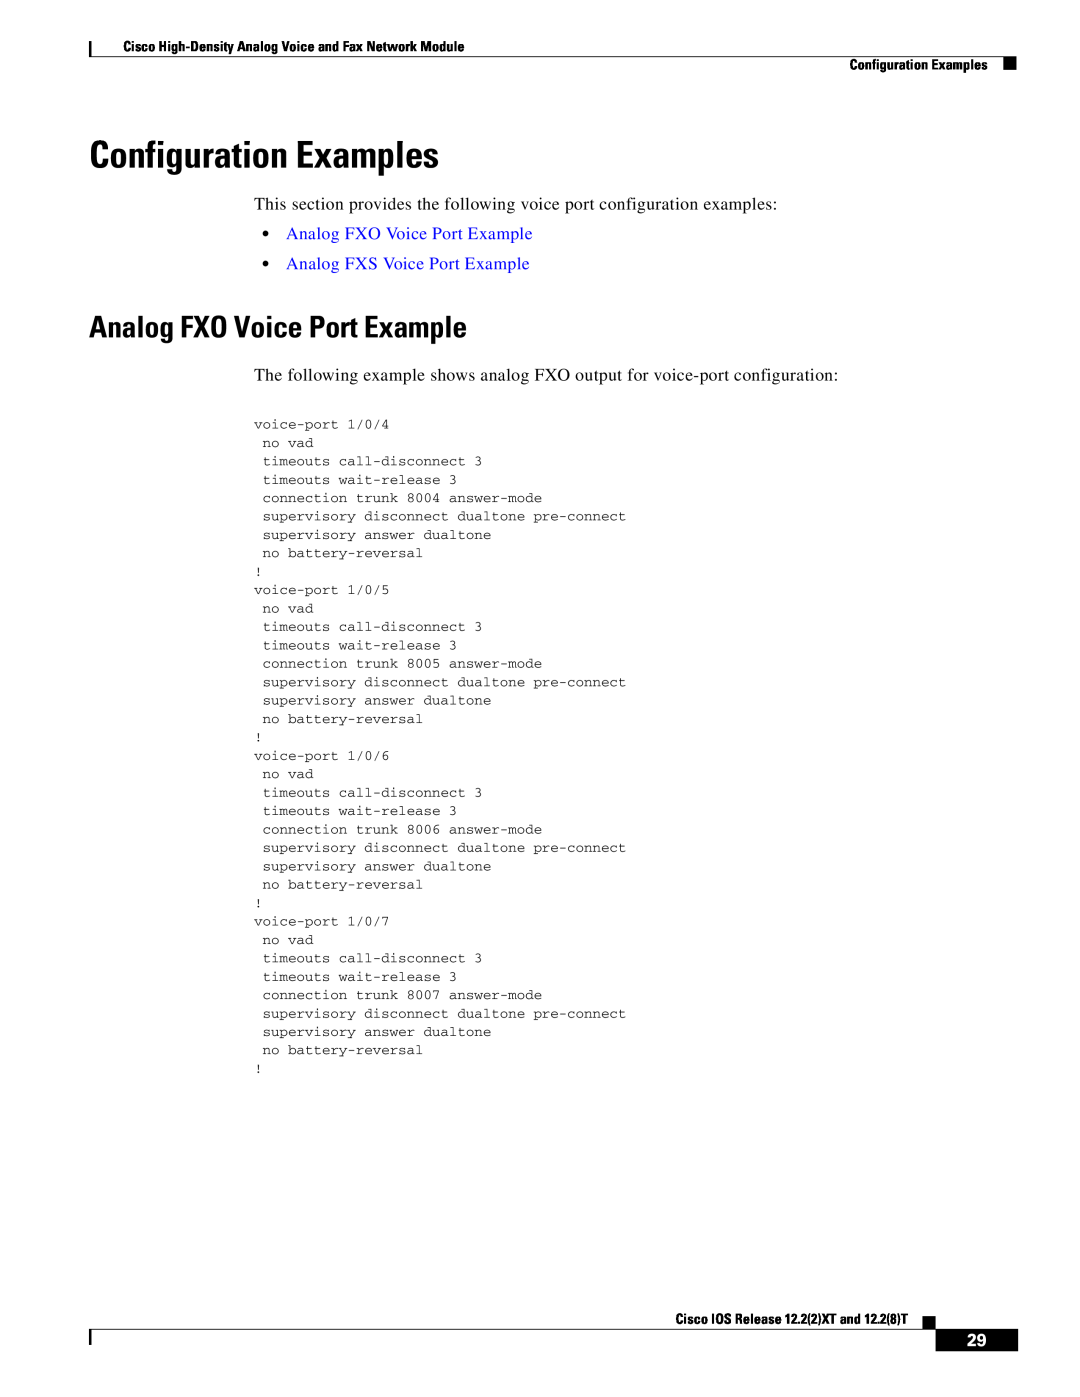 Weed Eater 2600 manual Configuration Examples, Analog FXO Voice Port Example, Analog FXS Voice Port Example 